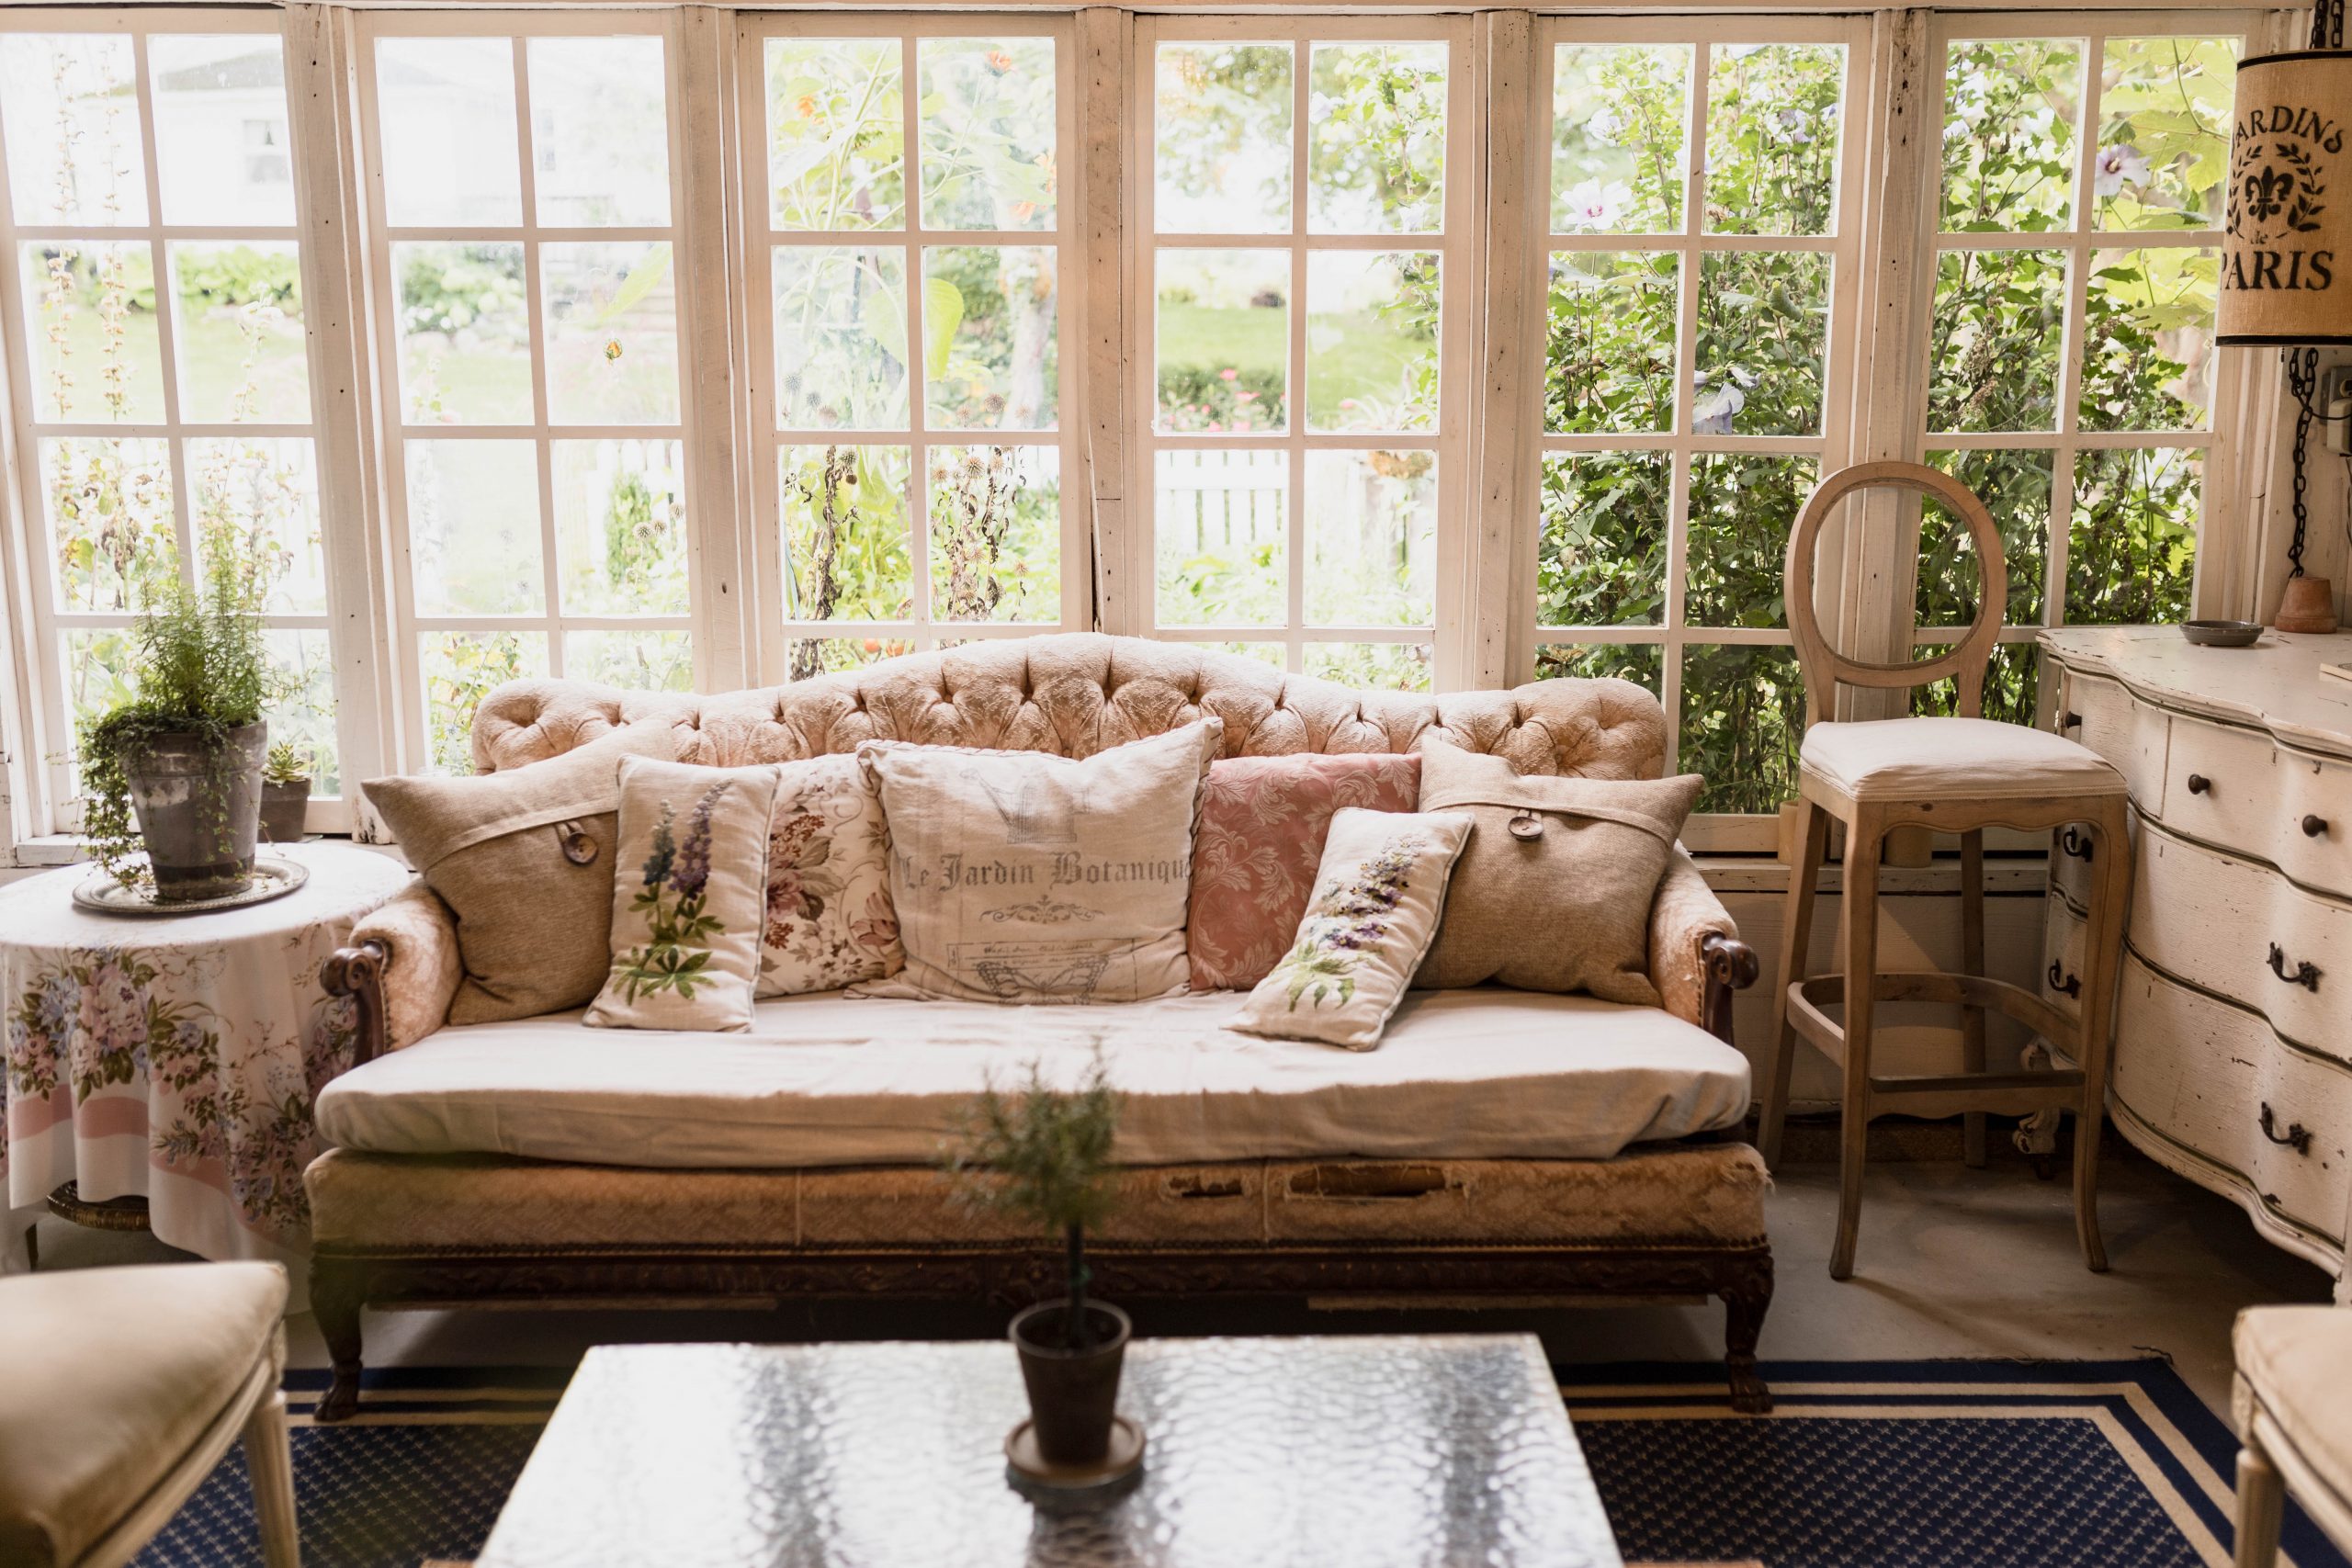 Vintage Sofa in the garden shed